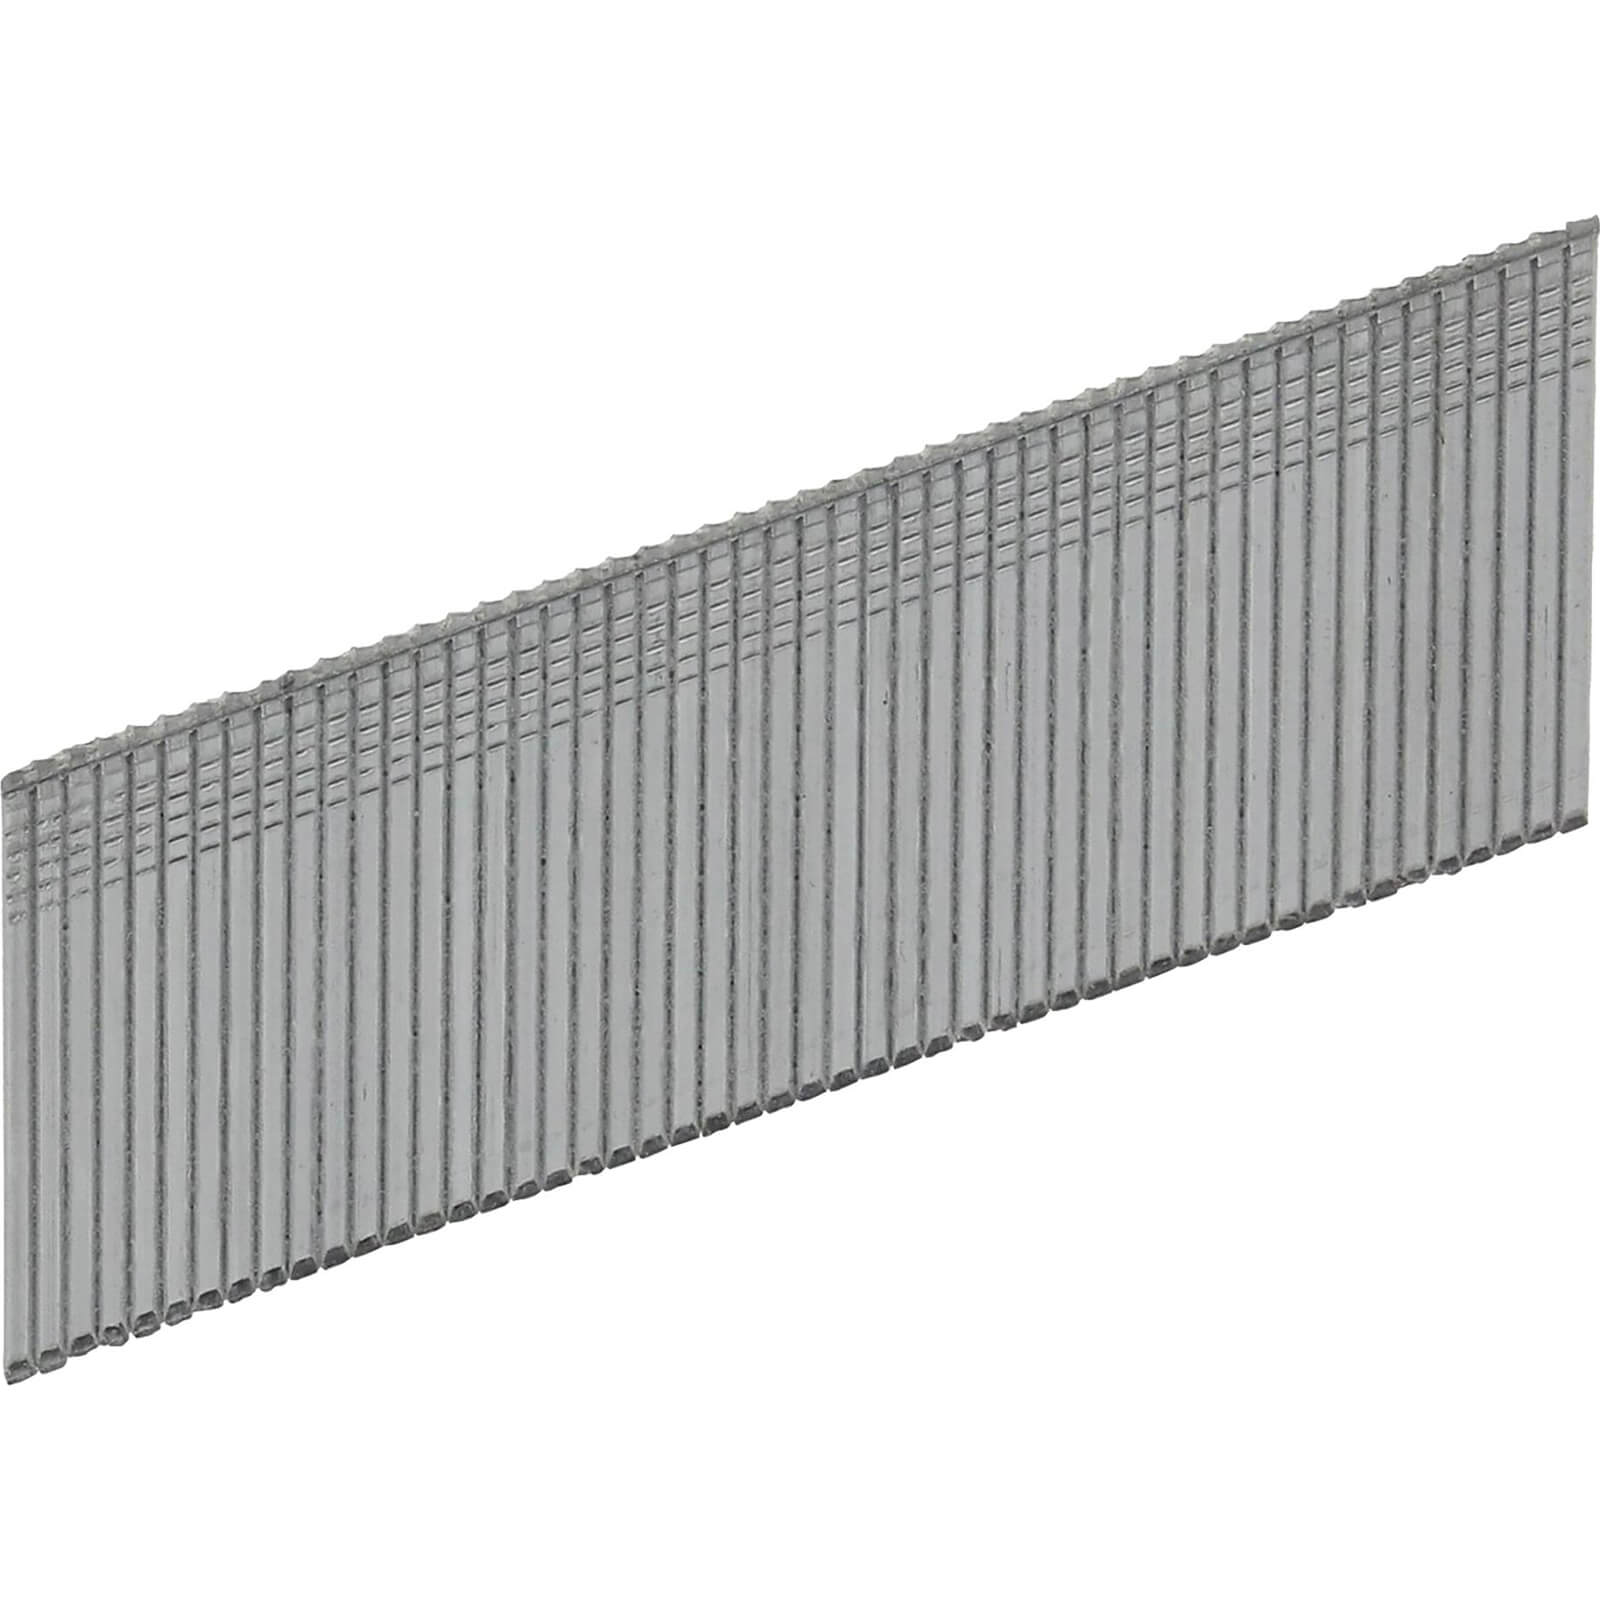 Paslode F16 x 38mm Electro Galvanised Angled Brad Nails Pack of 2000 for IM65A & IM250A Nail Guns